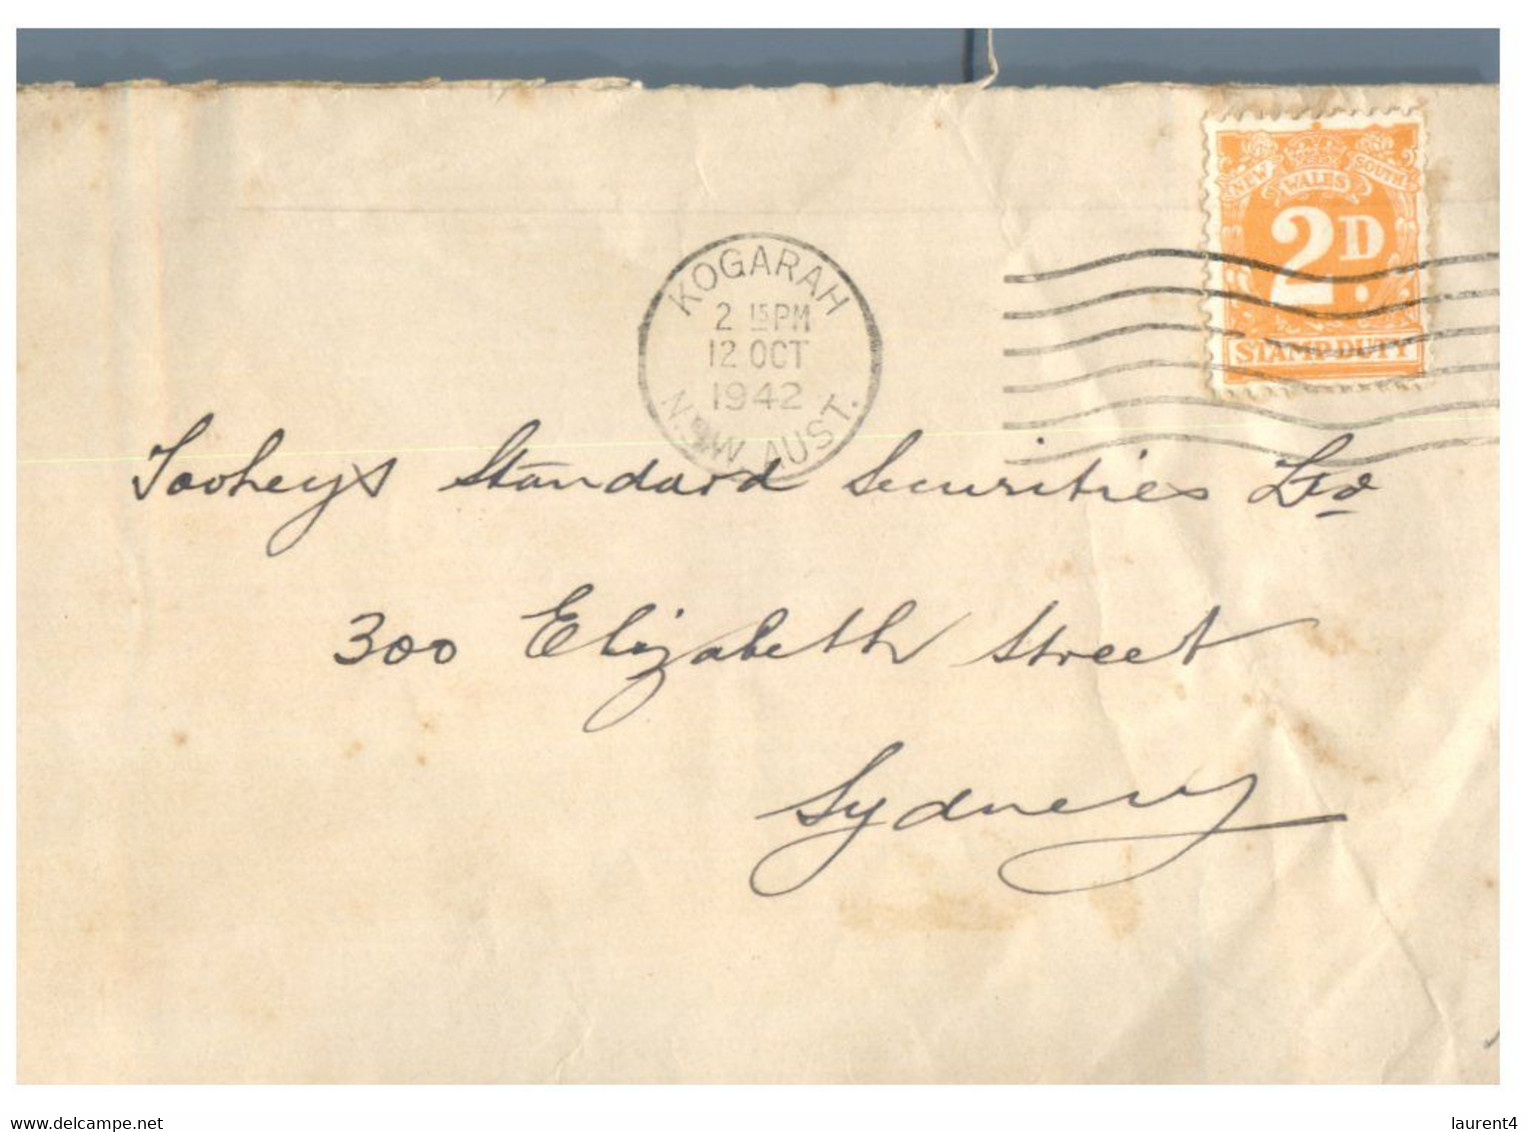 (NN 16) Australia 1942 Cover - Underpaid And Taxed 2d - Postage Due